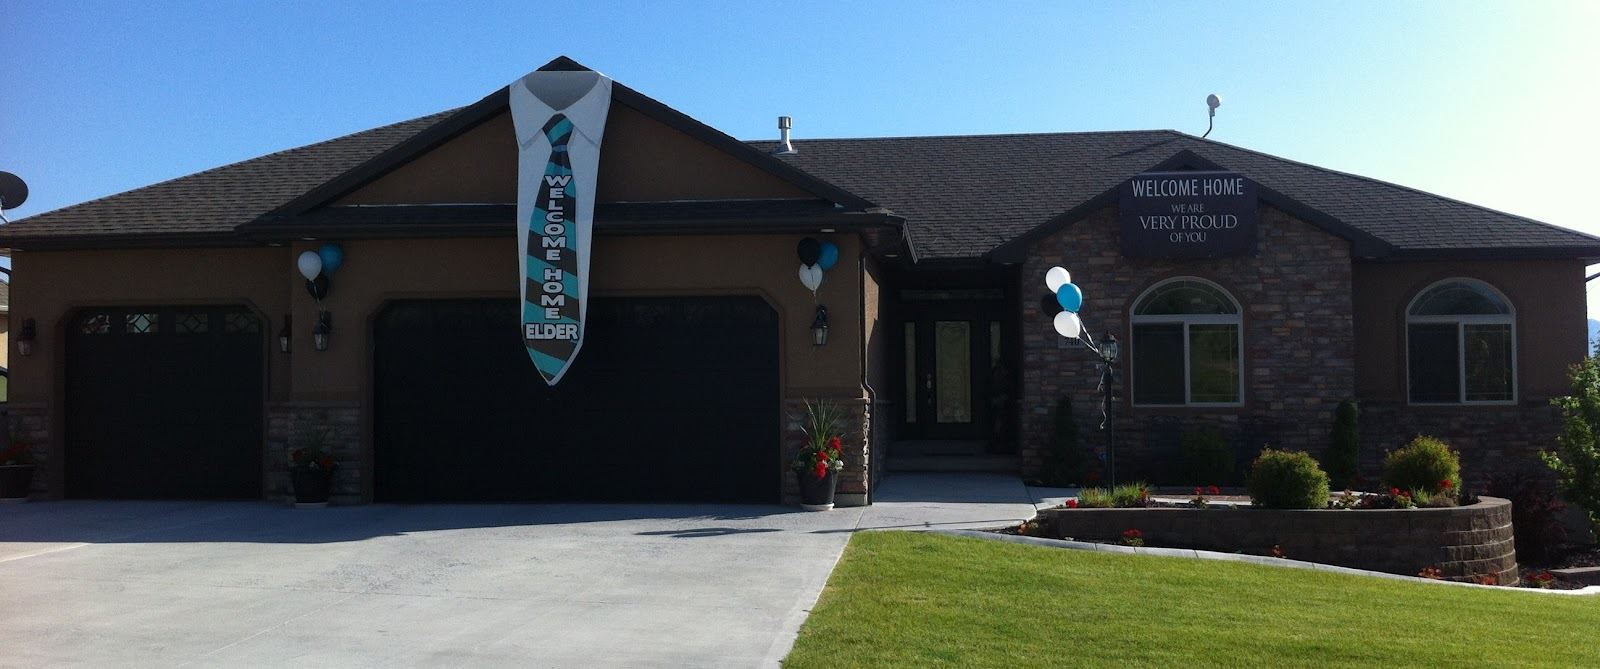 A home is decorated with welcome home signage featuring a sign that looks like a tie